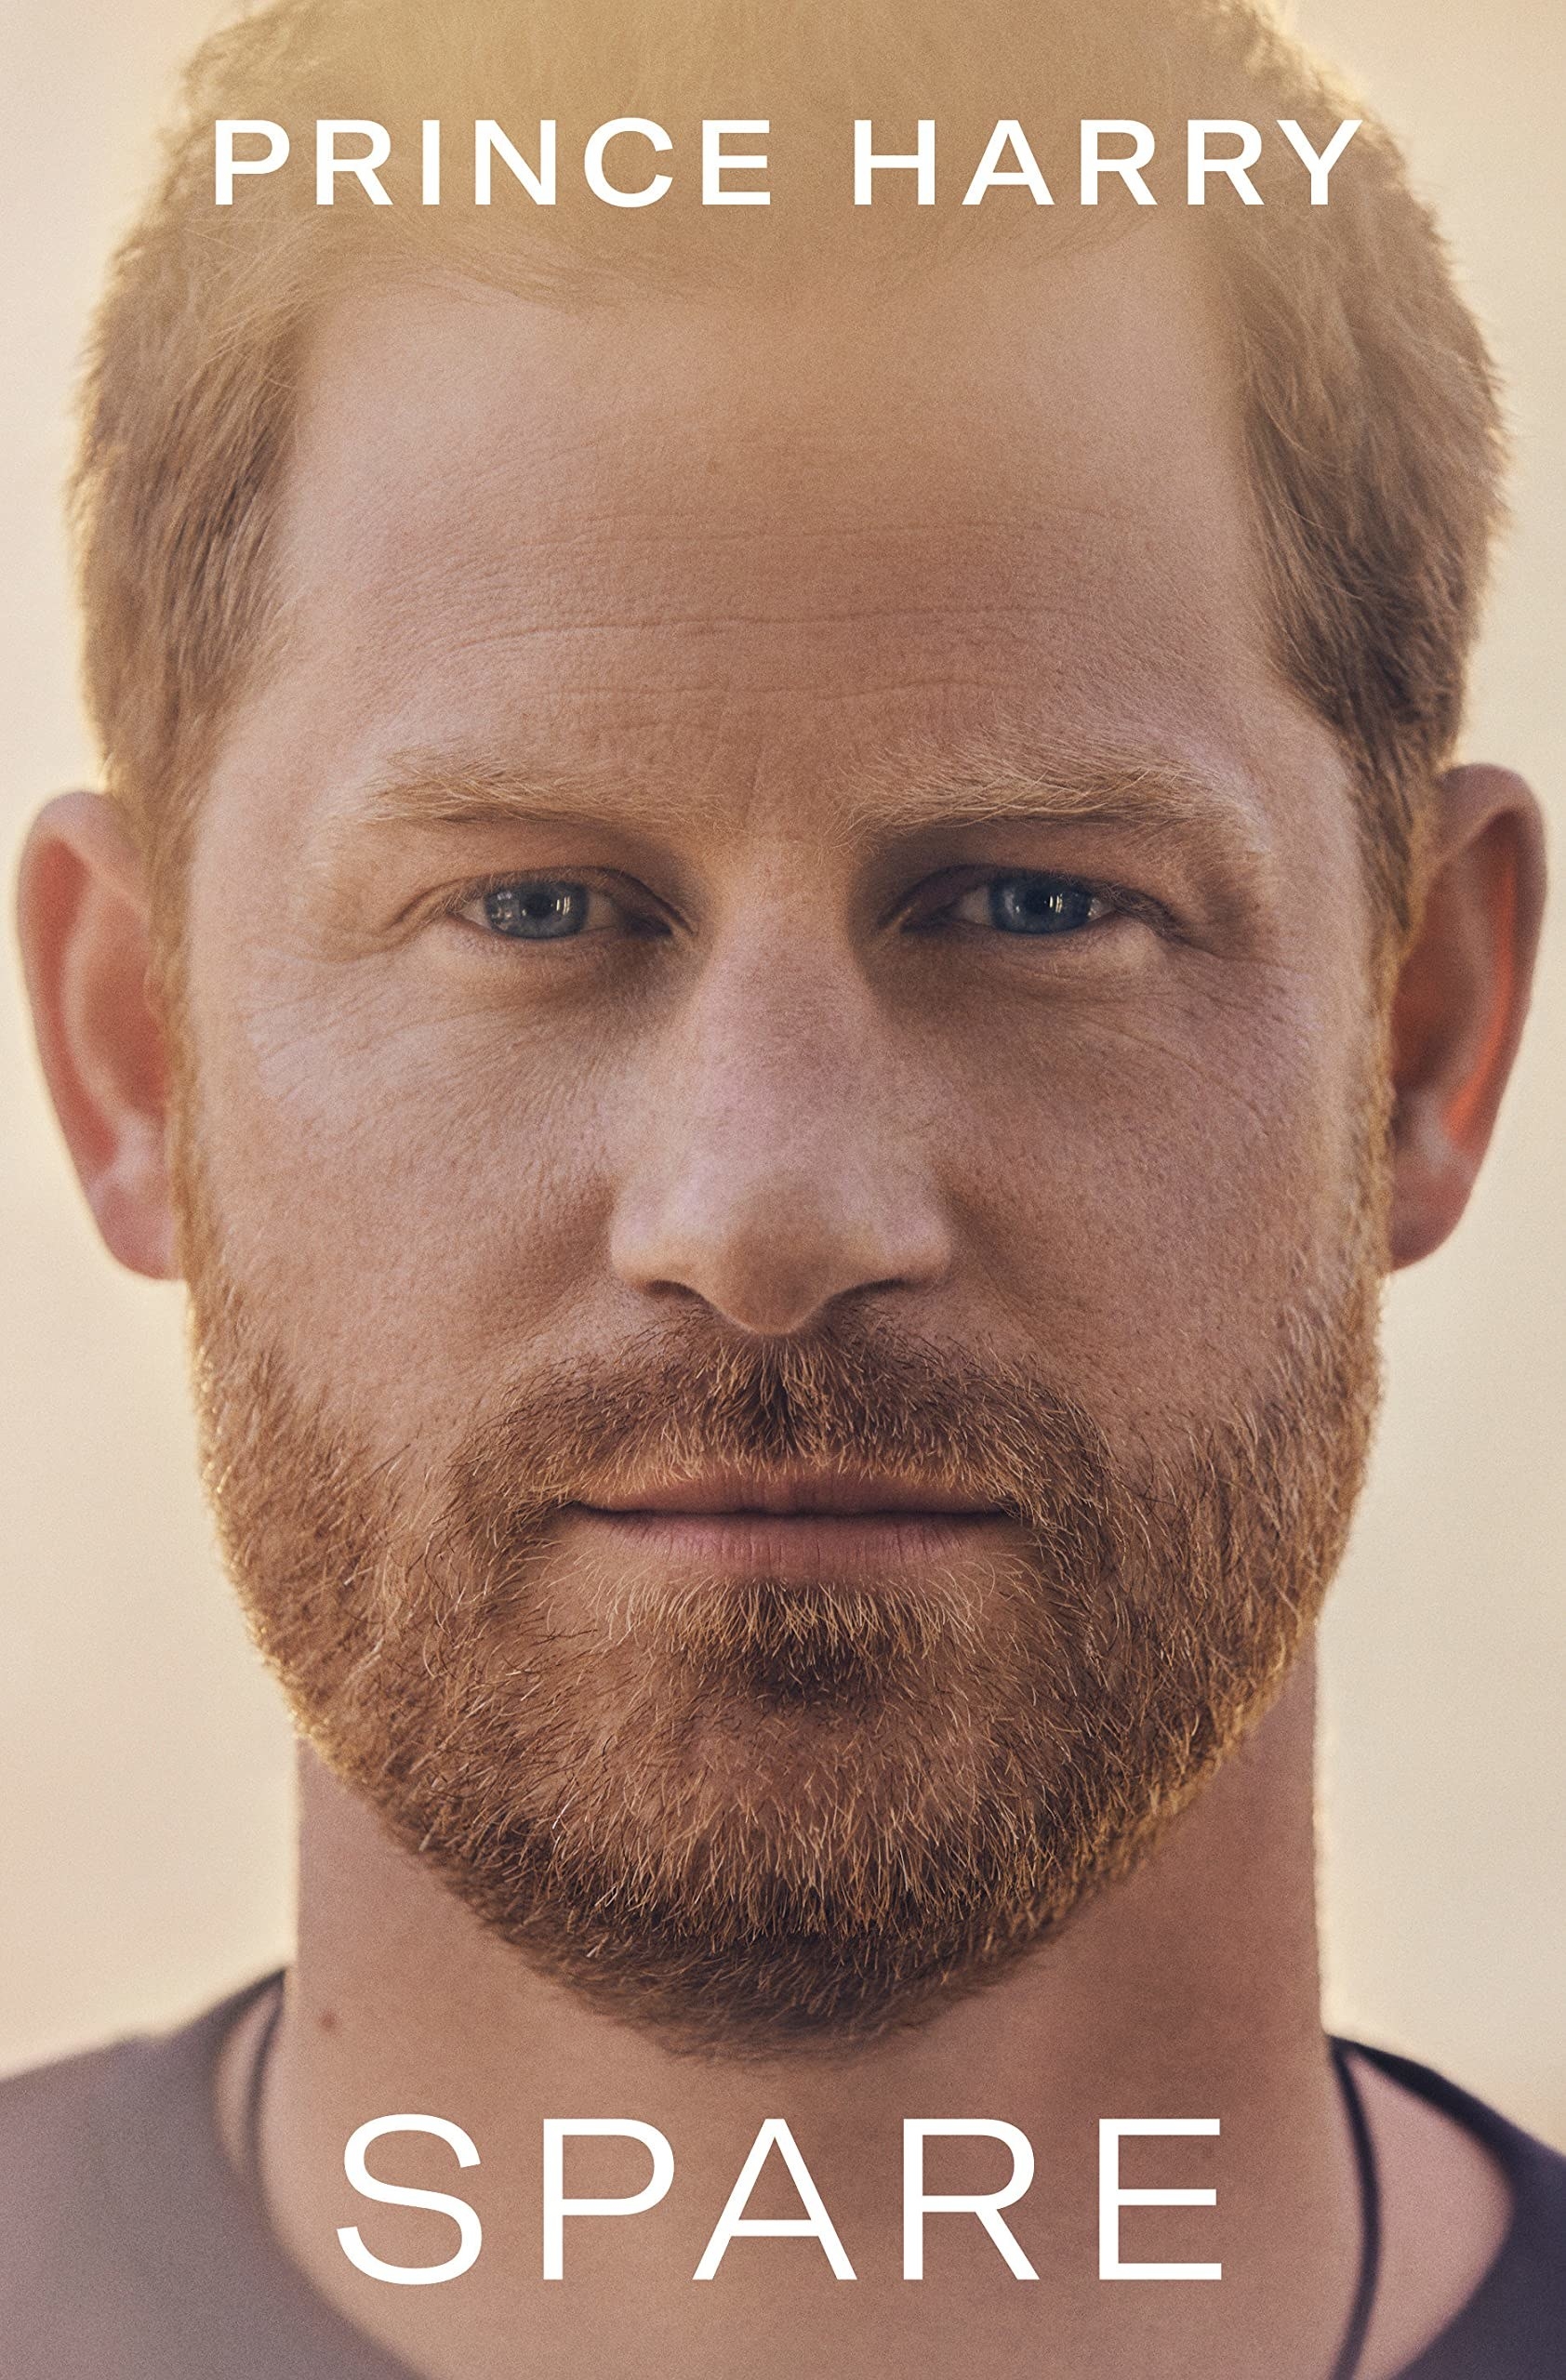 The cover of the book which is a close-up of Prince Harry&#x27;s face